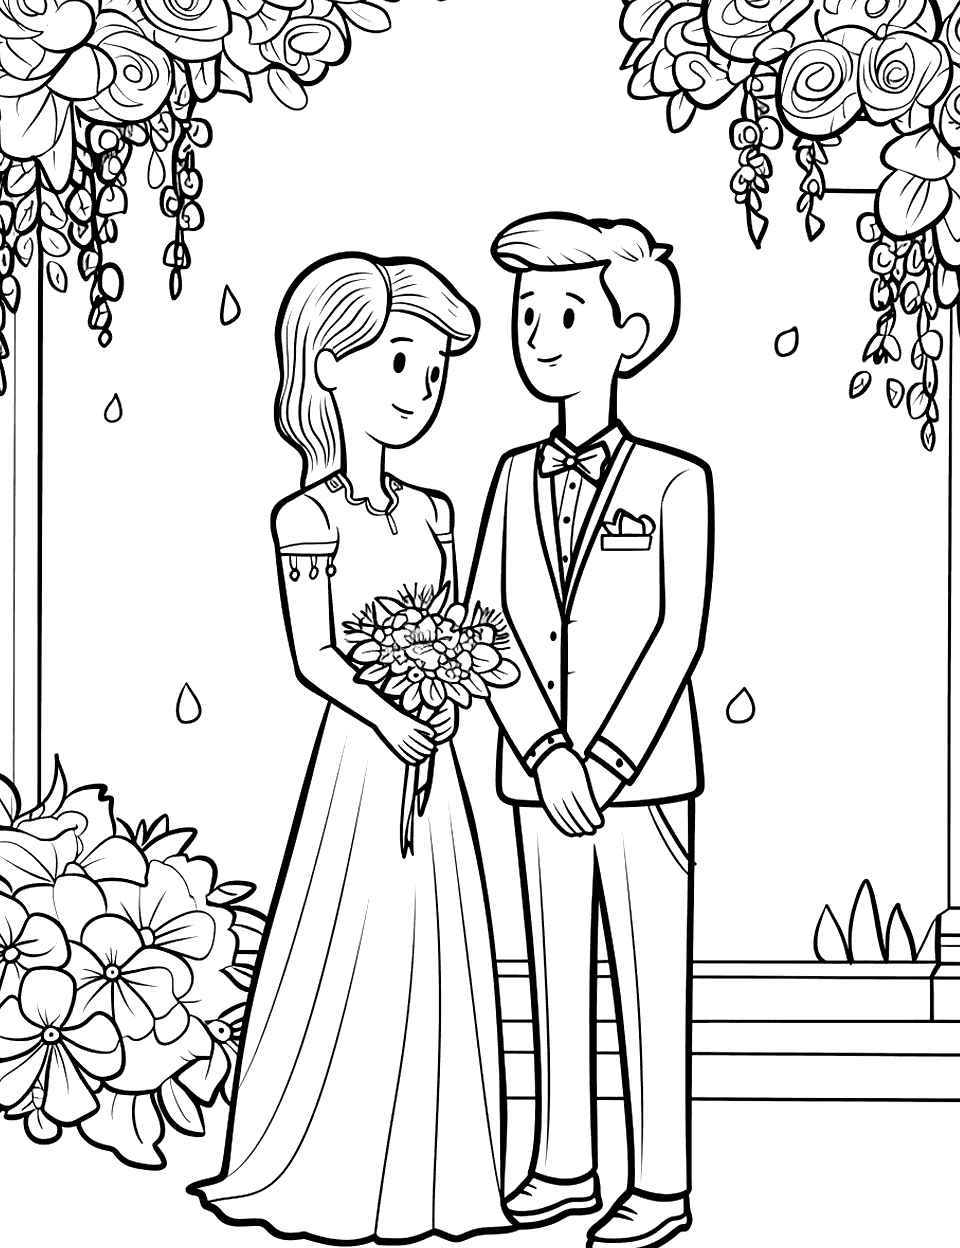 Groom and Bride at the Altar Wedding Coloring Page - Groom and Bride standing at the altar and the bride with a bouquet of flowers.